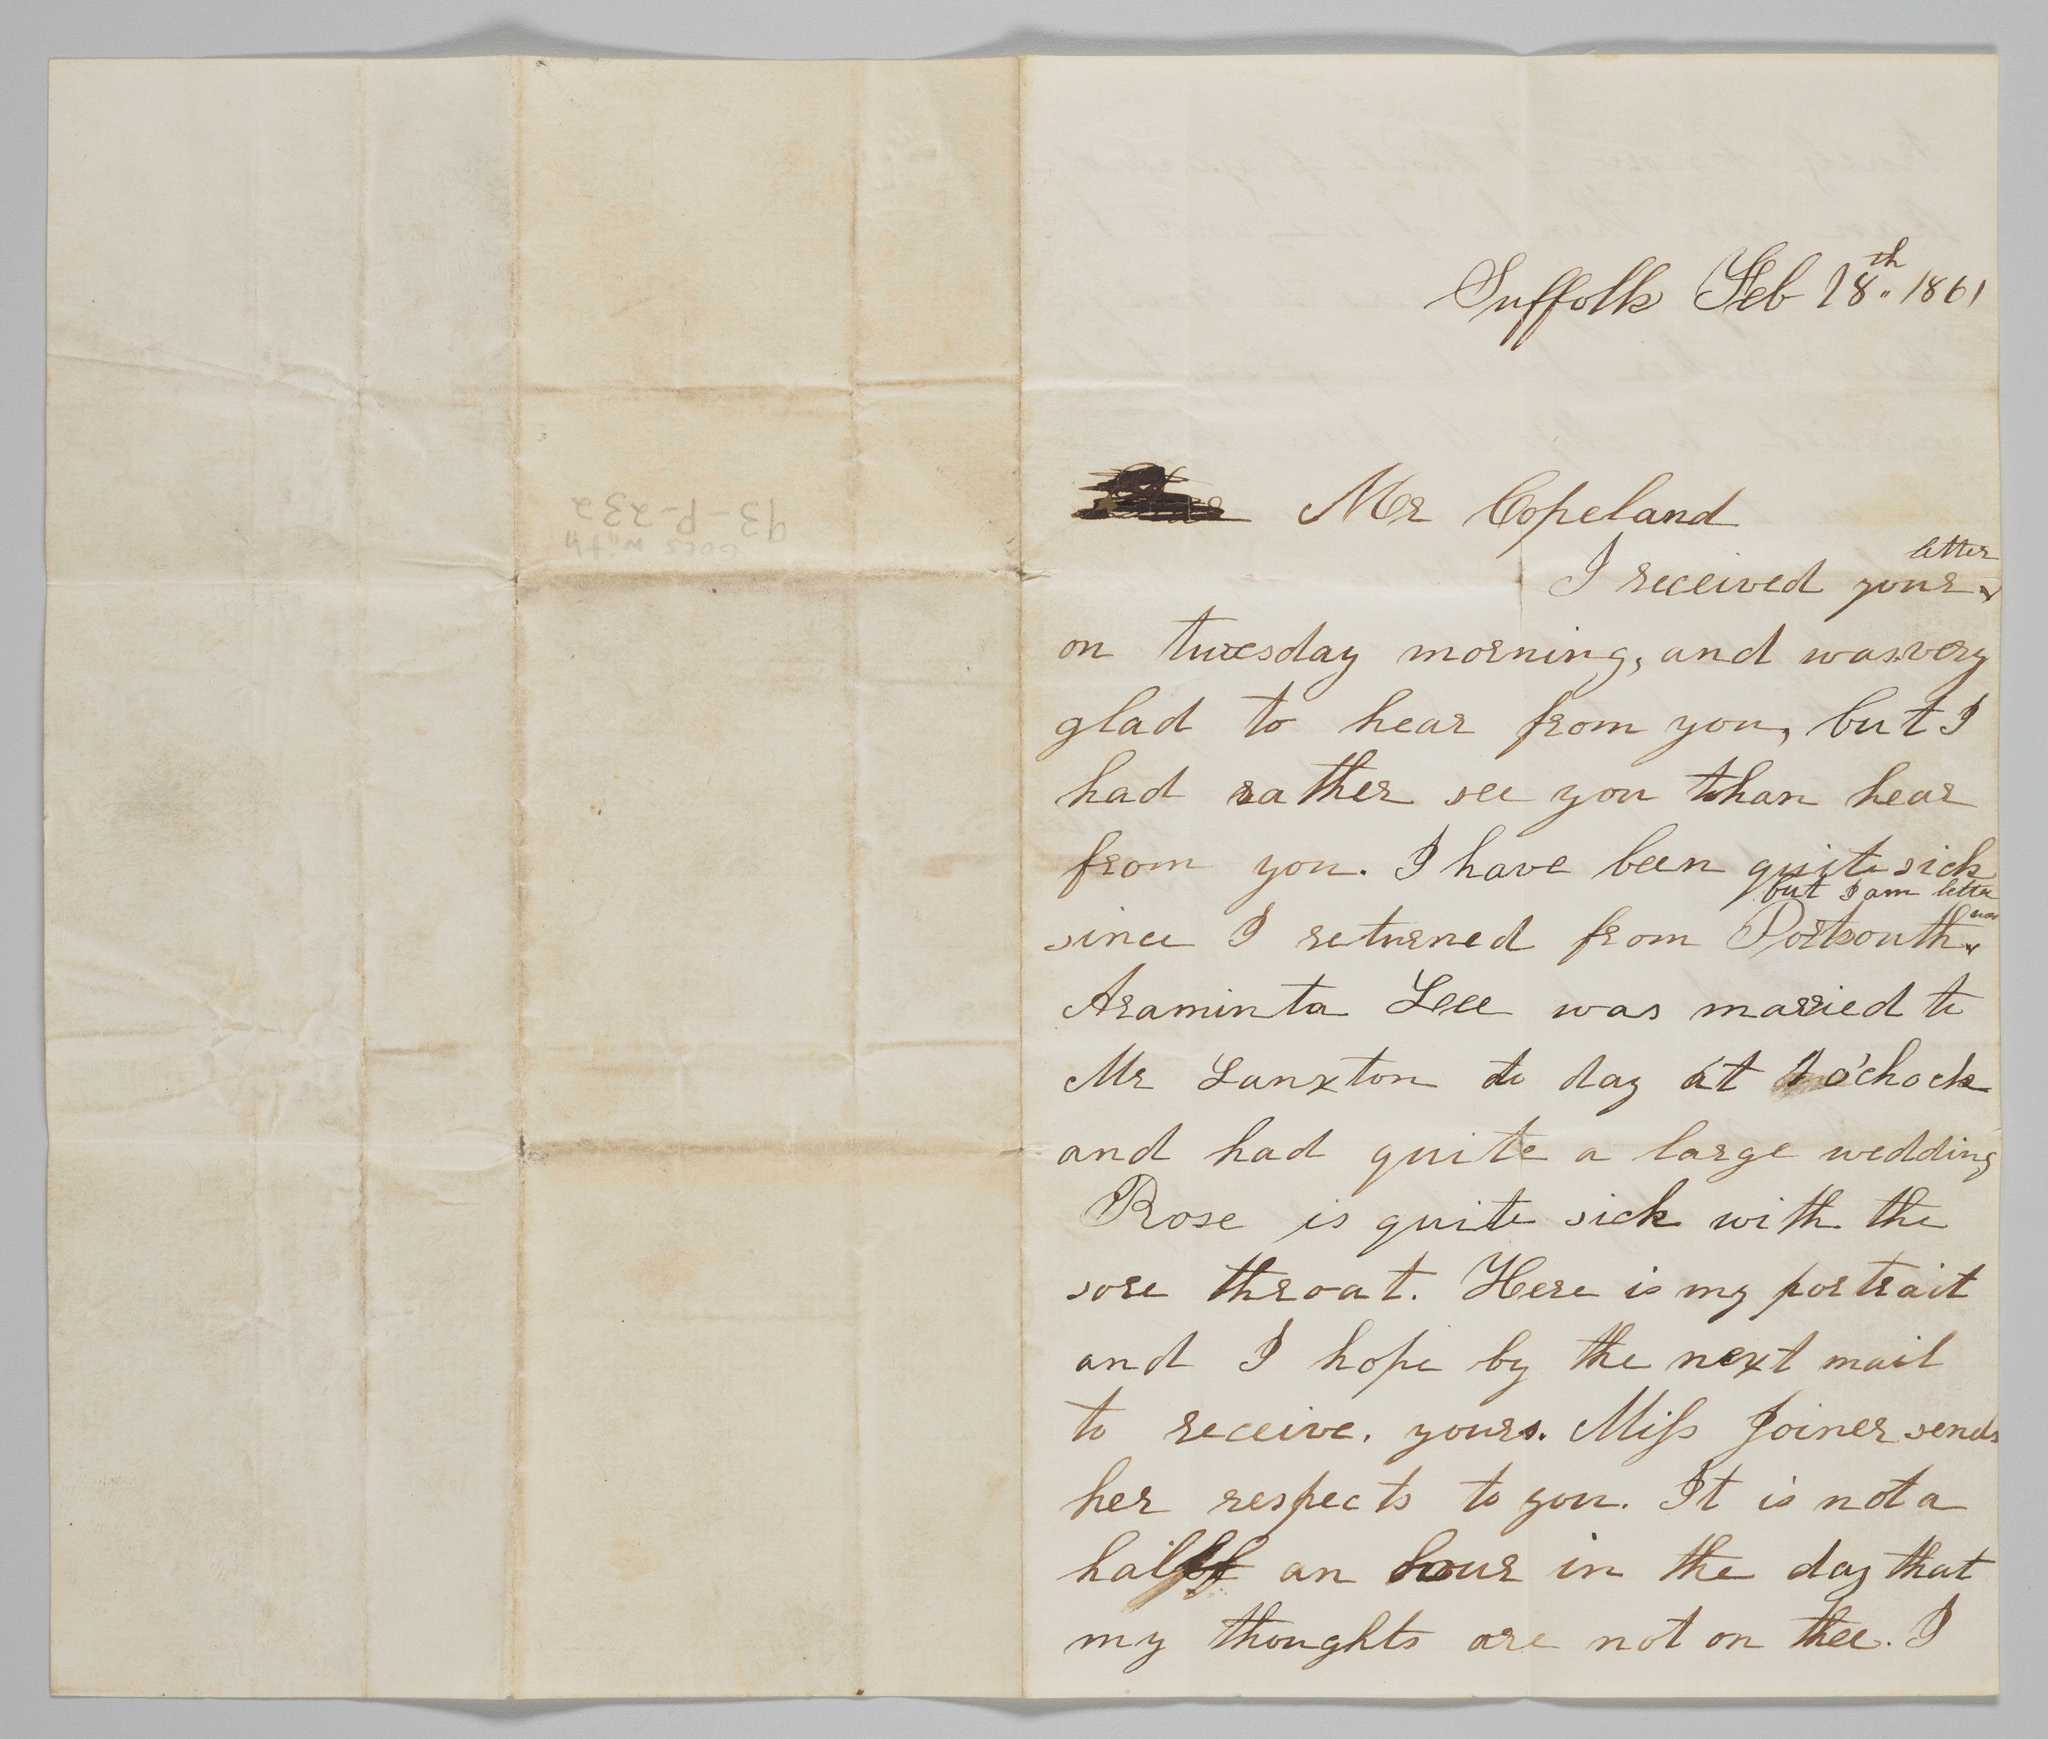 This letter was written on February 18, 1861, by Ann Hurst Copeland to her husband John H. Copeland. The letter details the recent betrothals of several friends and Ann, who signed the letter "Annuk," comments she has been ill. She also expresses her devotion to Copeland, writing "It is not a half an hour in the day that my thoughts are not on thee." She also mentions that her portrait is included with the letter and she hopes to receive a portrait from him in return.